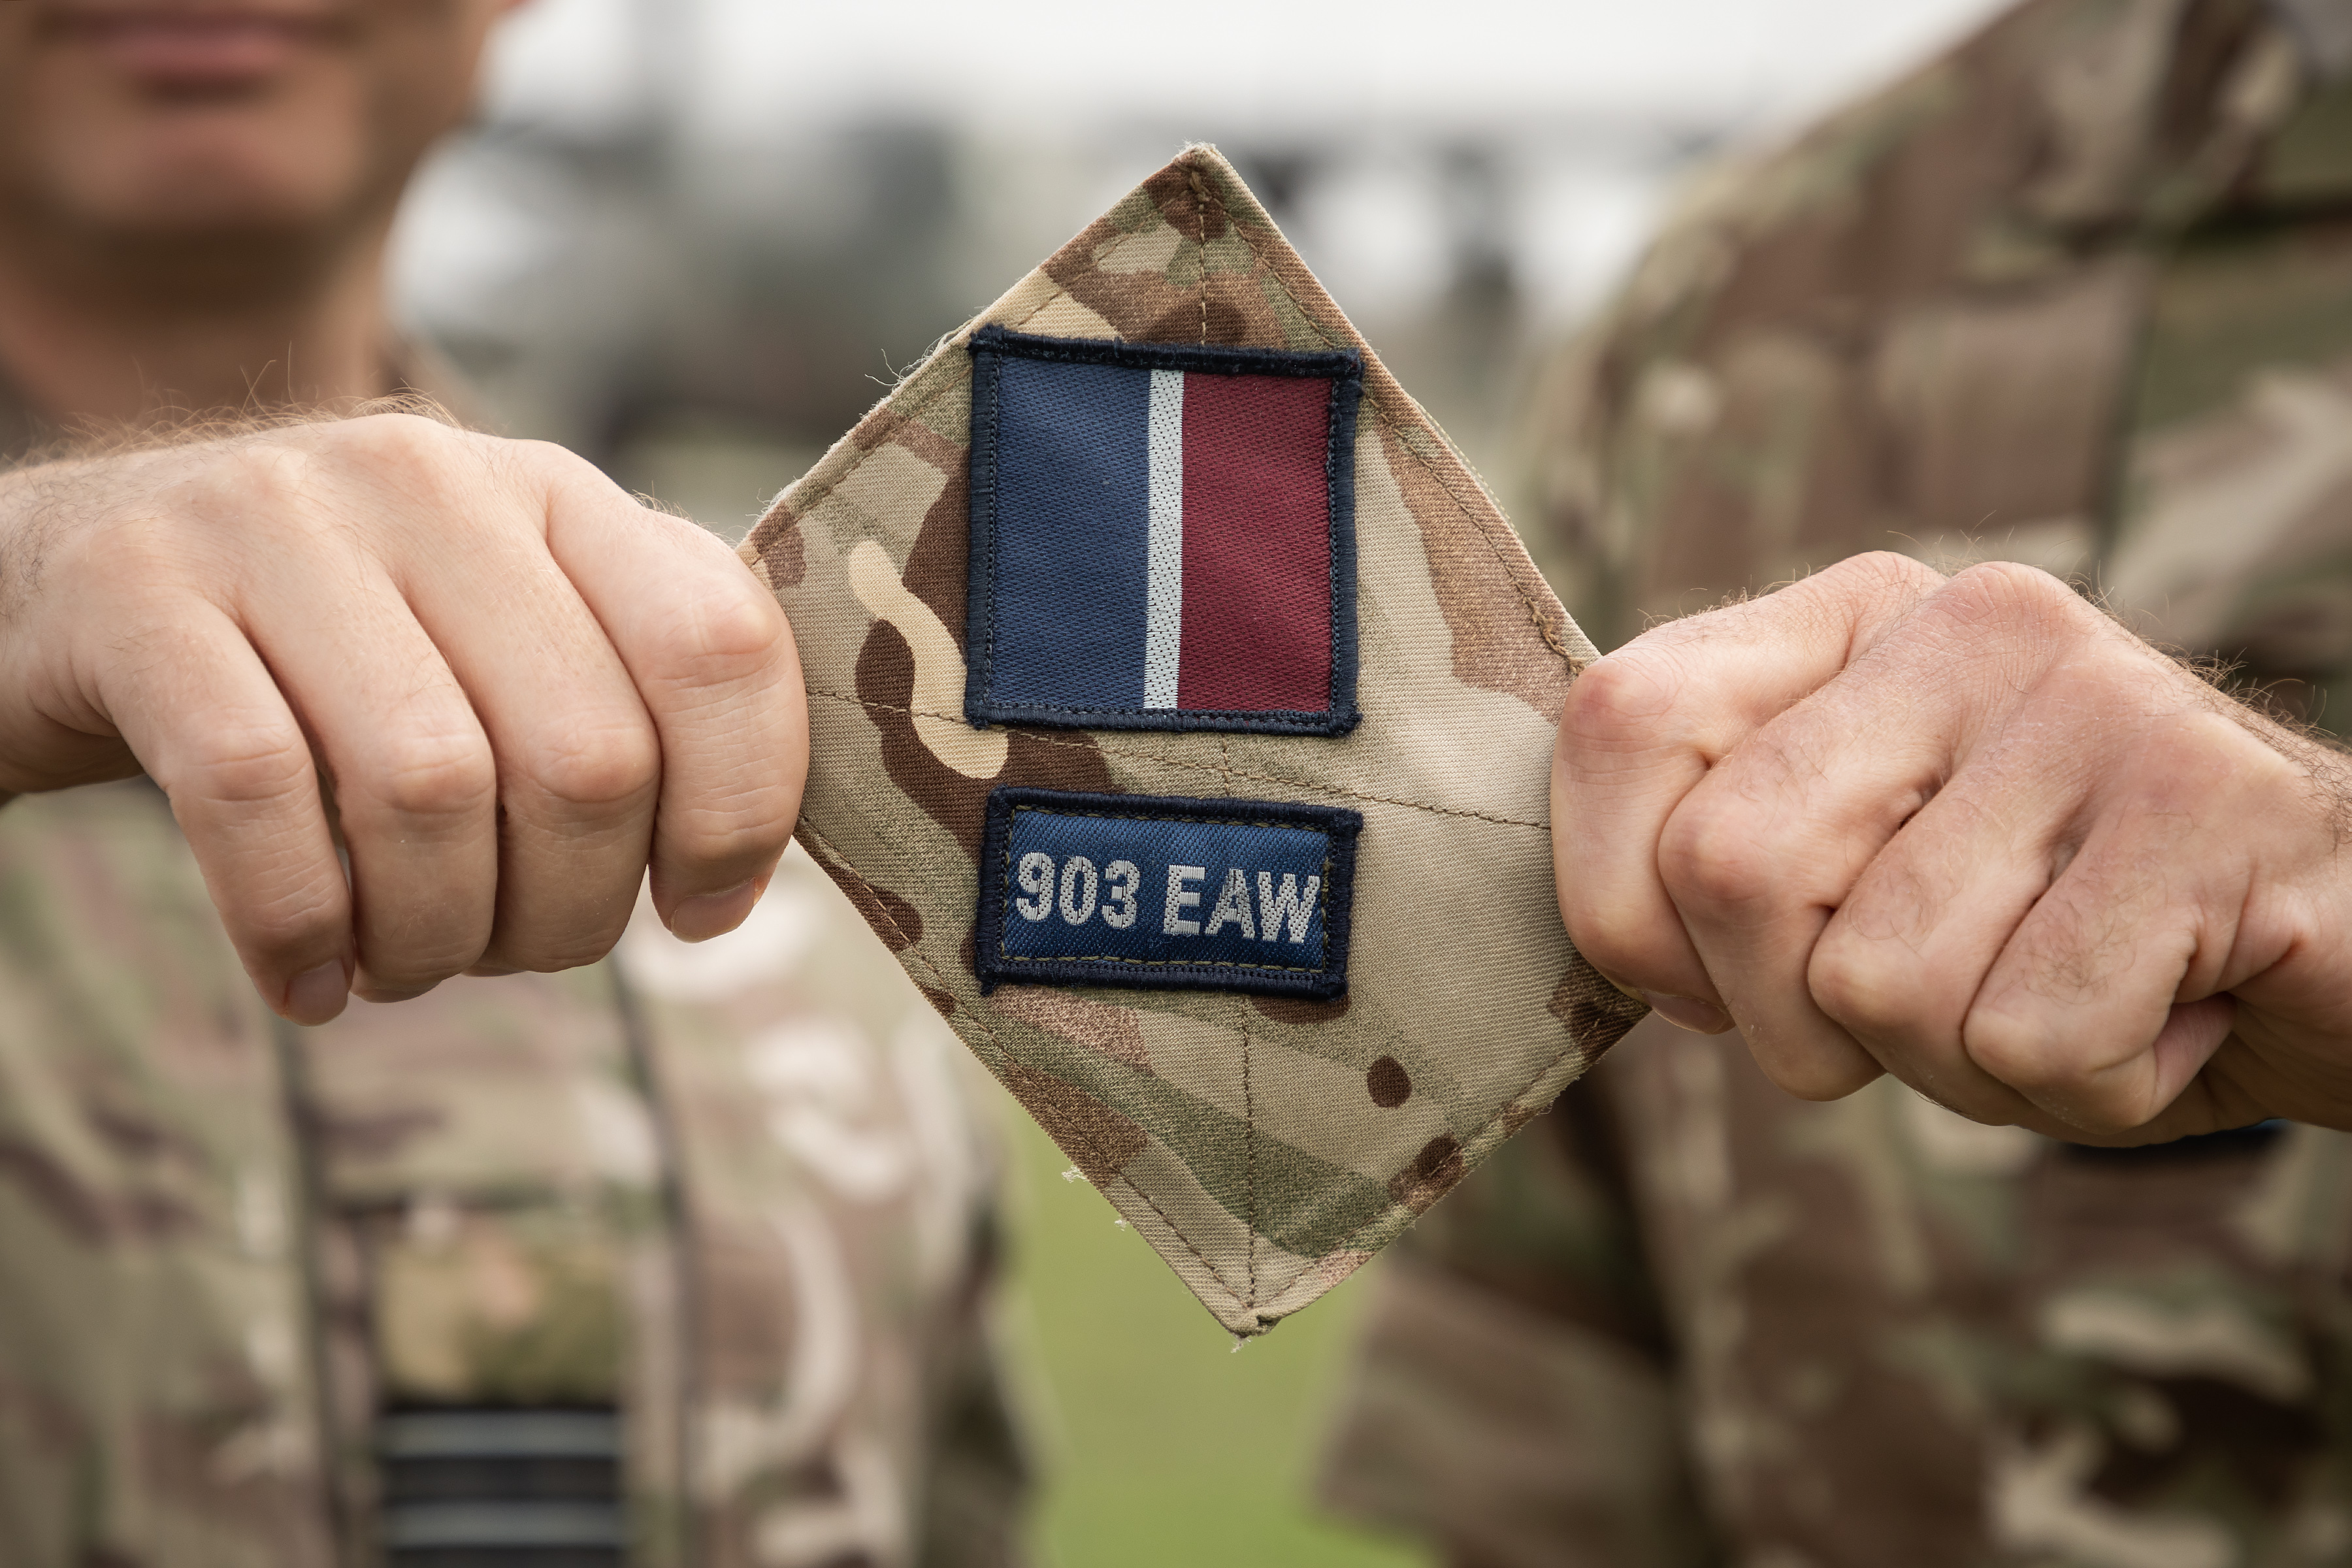 Image shows a close up of RAF aviators holding Expeditionary Air Wing badge.